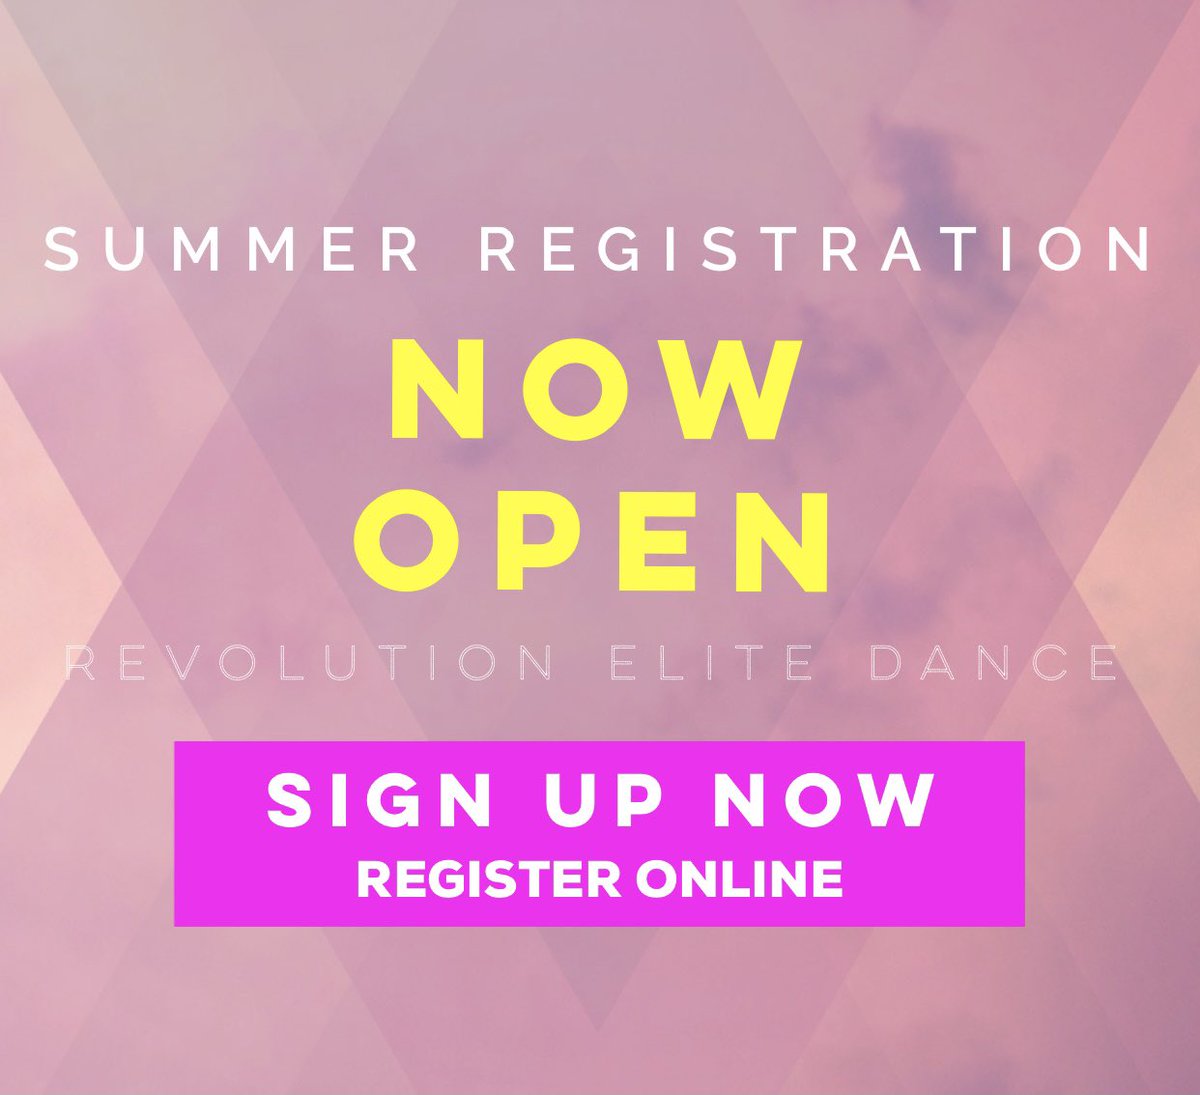 SUMMER REGISTRATION IS NOW OPEN! Register online and come dance with us this summer! ♥️